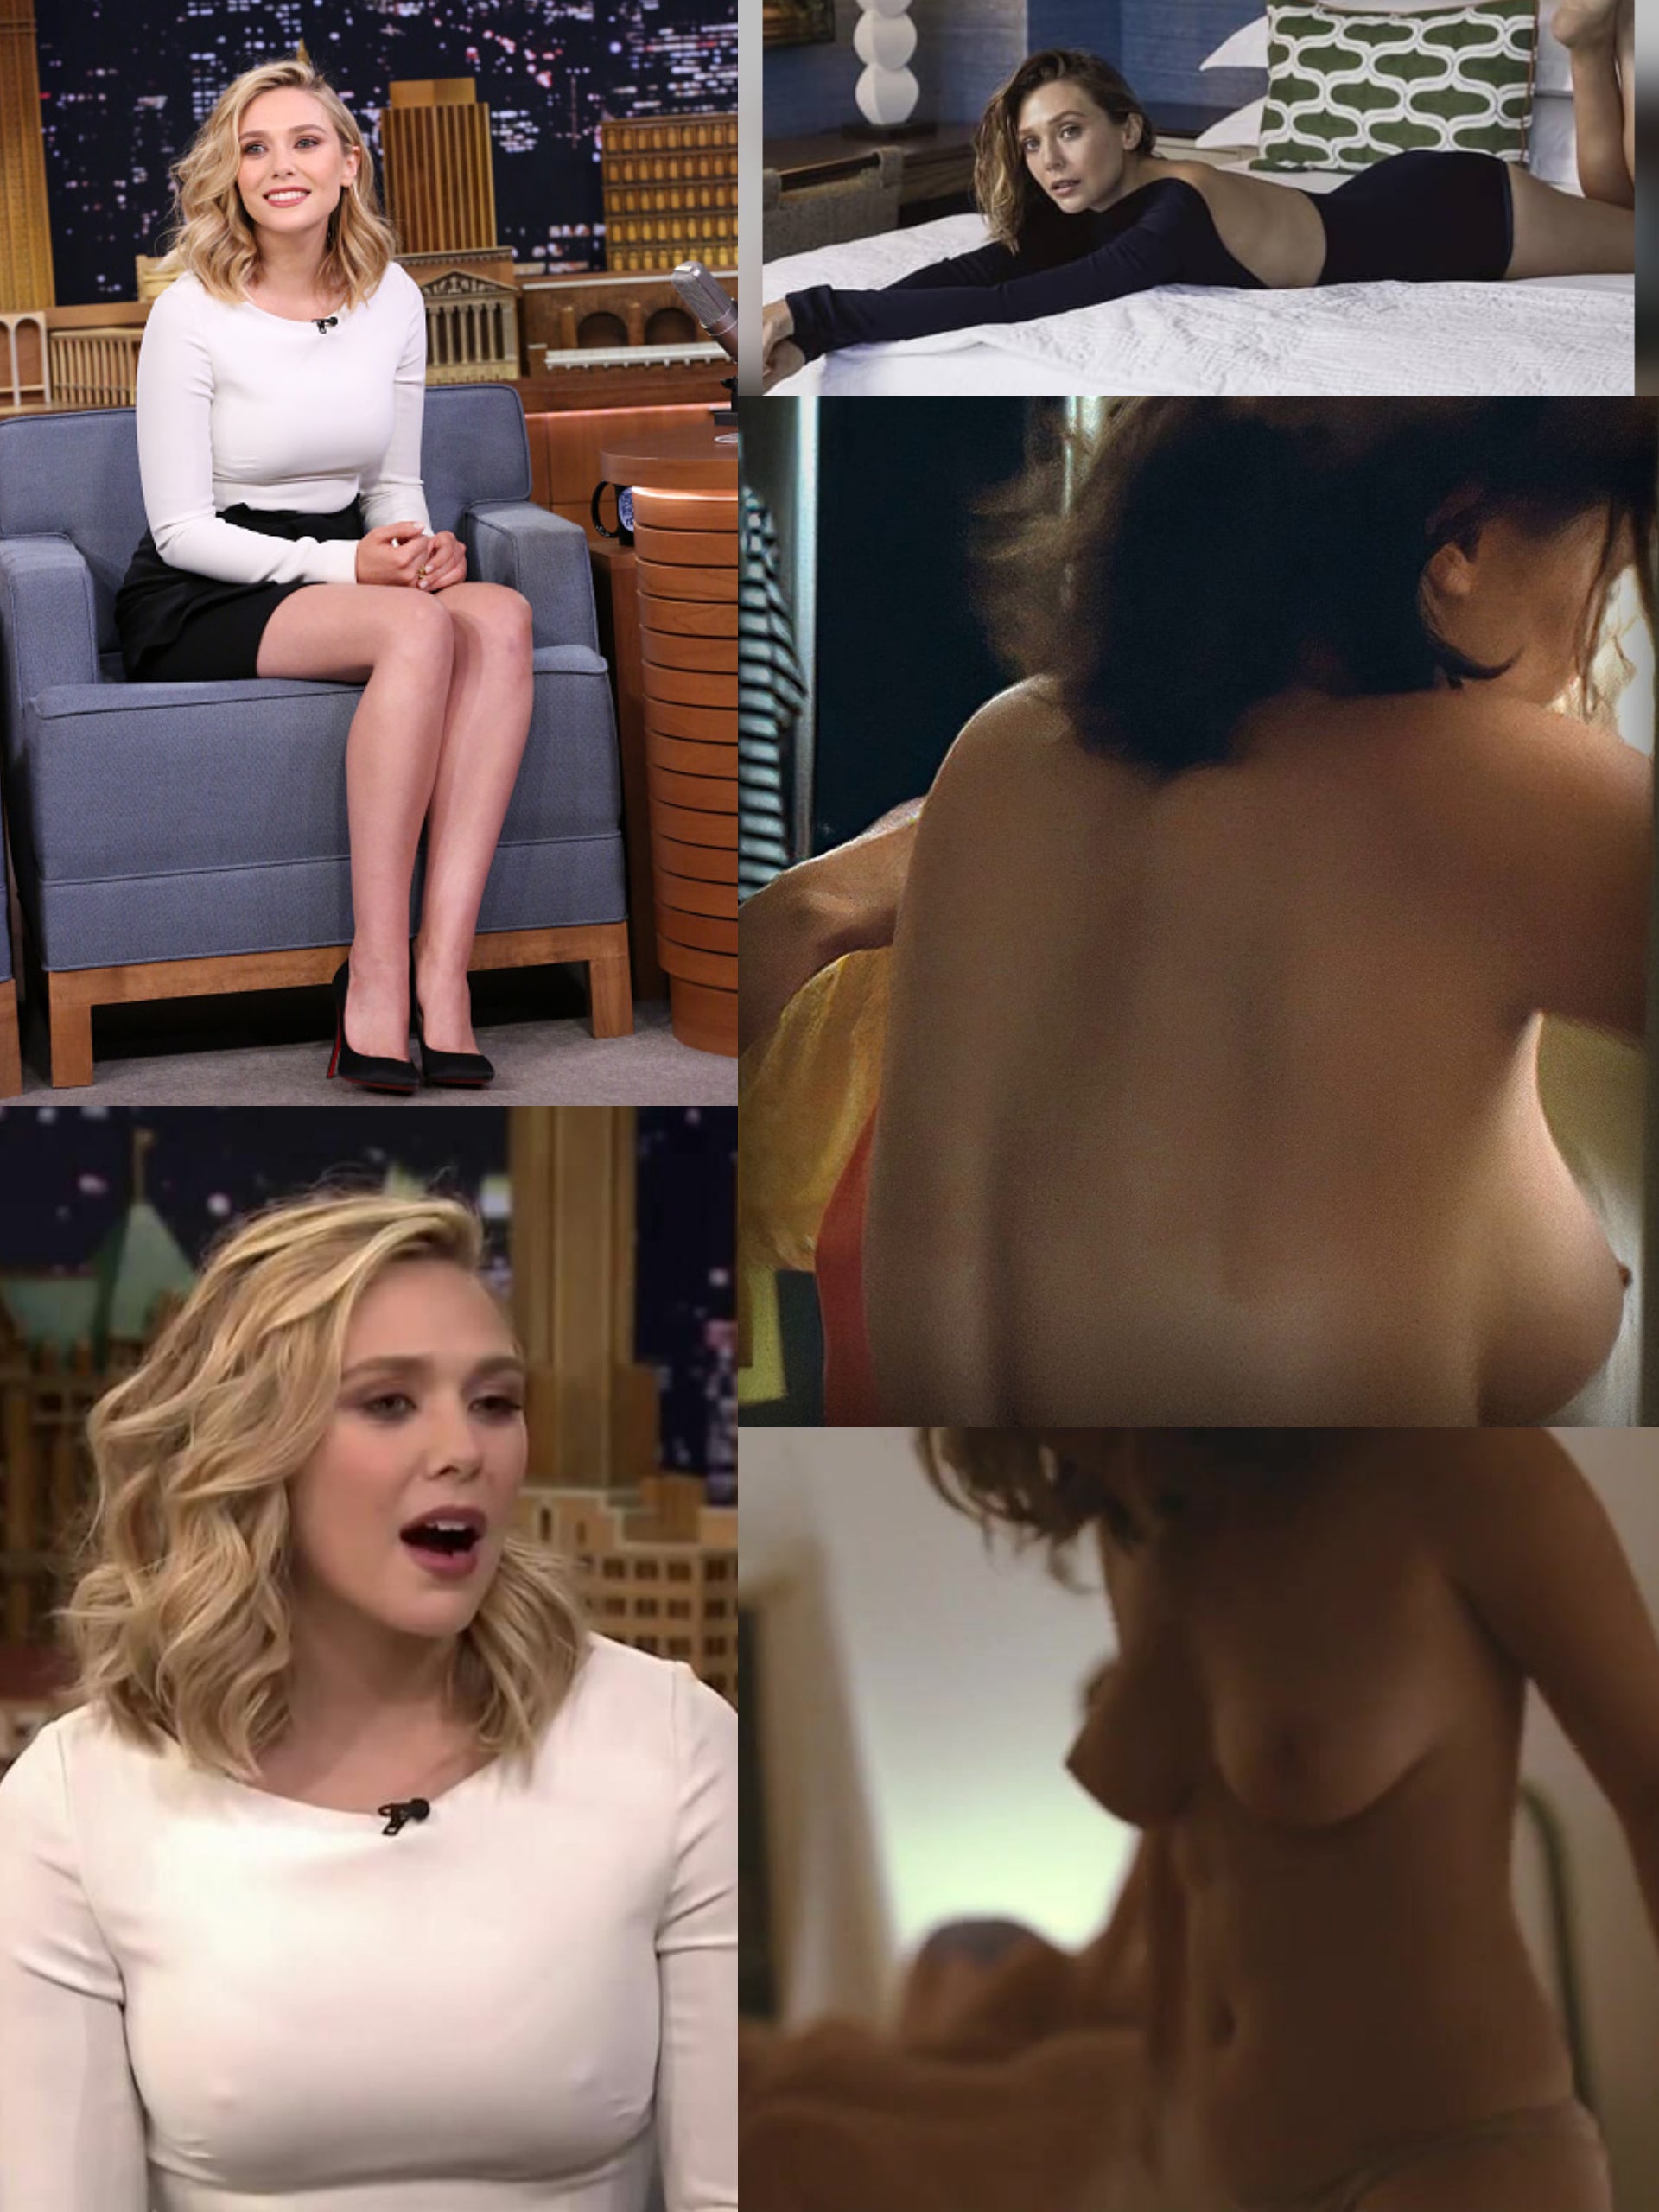 Elizabeth Olsen And Her Beautiful Breasts Photo on Porn imgur